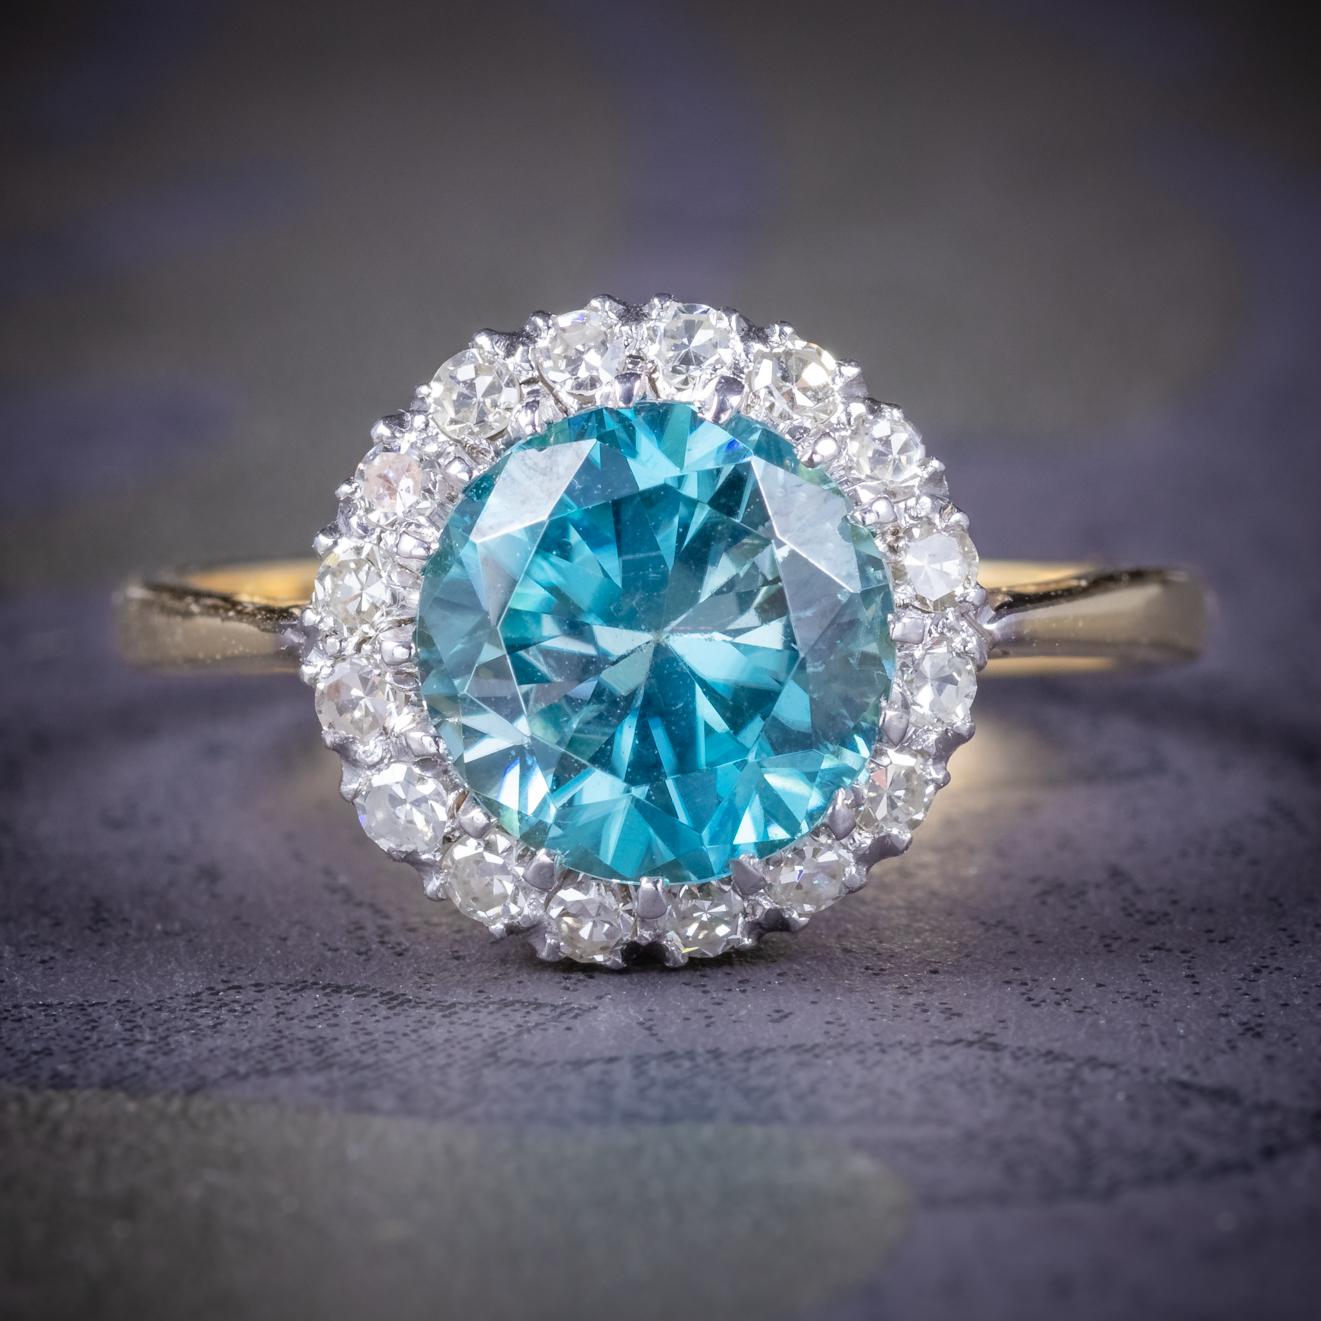 A fabulous antique Edwardian cluster ring C. 1910, adorned with a beautiful 3.21ct blue Zircon surrounded by a halo of old cut Diamonds. 

The old cuts are beautiful SI1 clarity - H colour Diamonds, approx. 0.80ct in total.

The stones are set in a